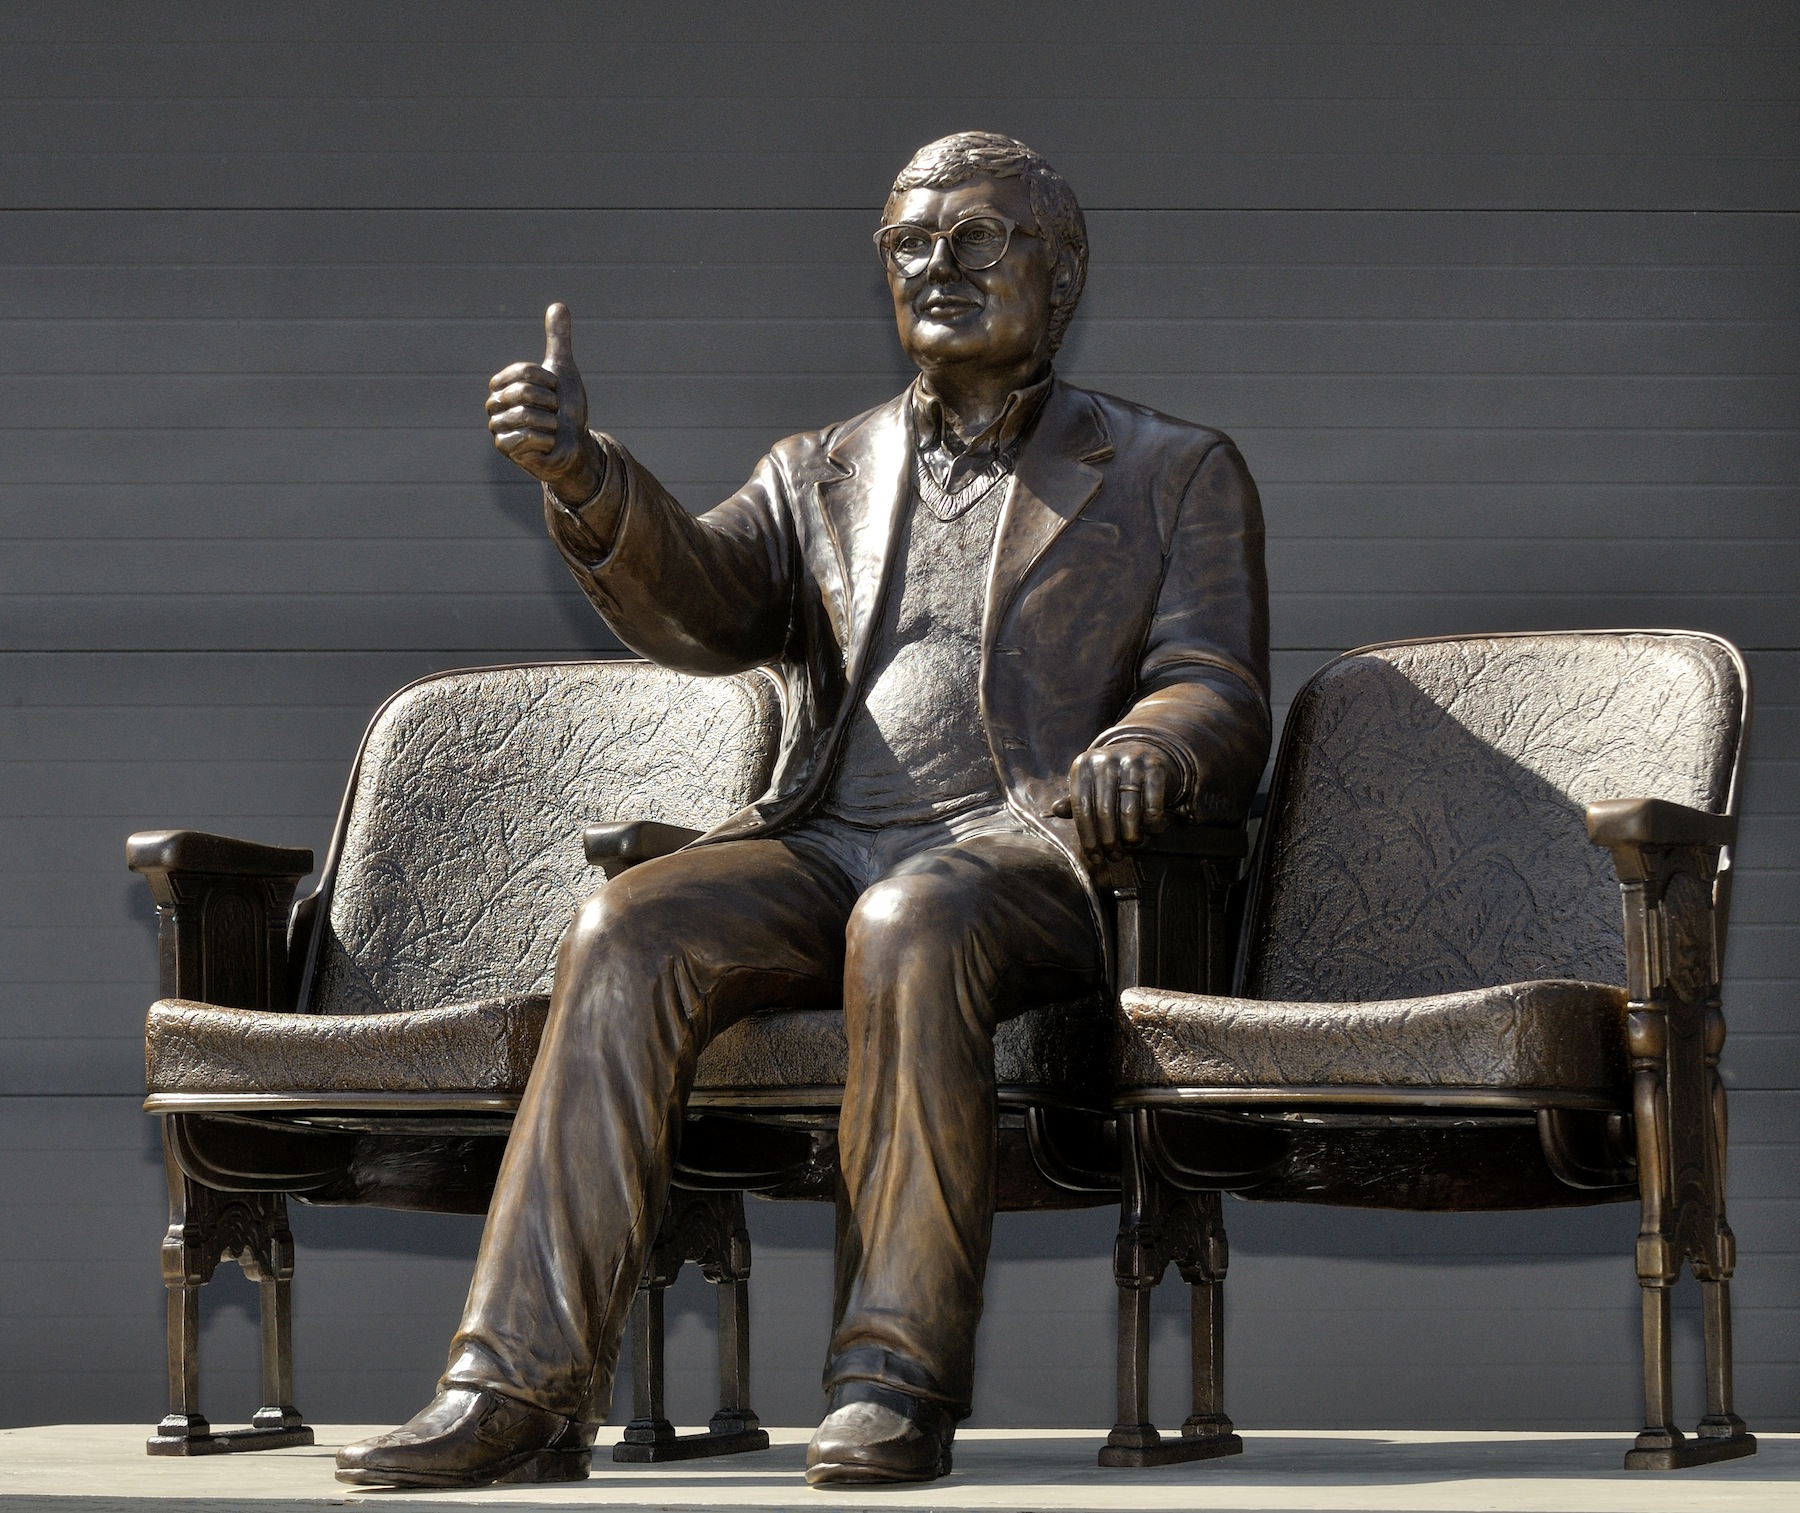 A bronze statue of Pulitzer Prize winning film critic Roger Ebert giving his famous 'thumbs up" sign in Champaign, Ill. (Thompson-McClellan / AP Photo)